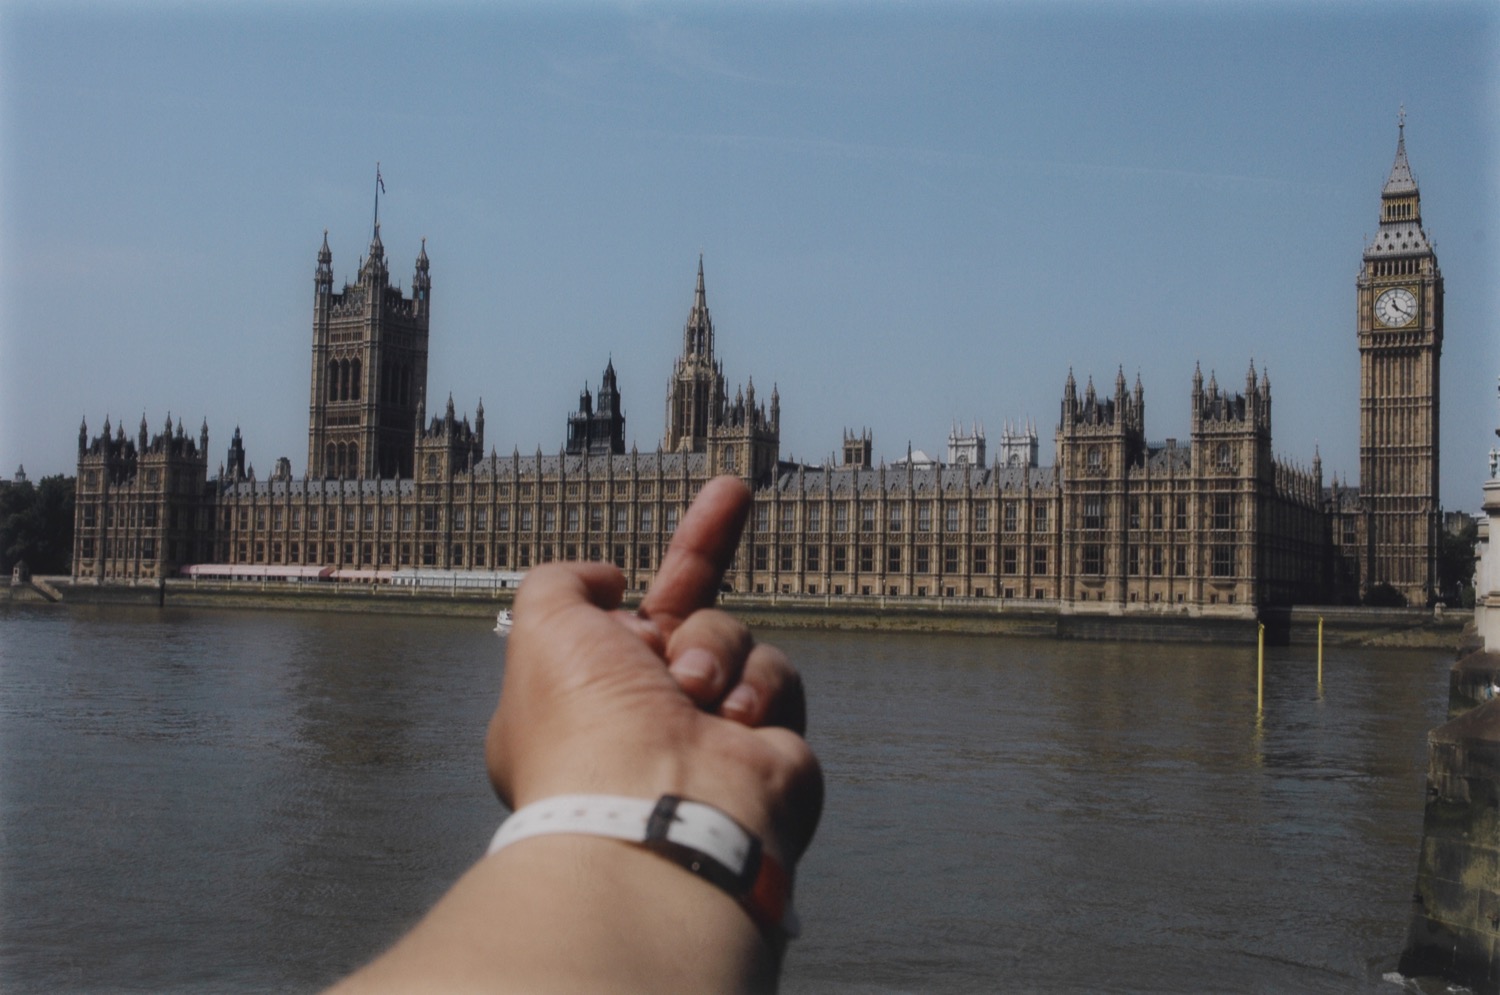 A photograph of a hand giving the middle finger to Westminster Abbey in London.